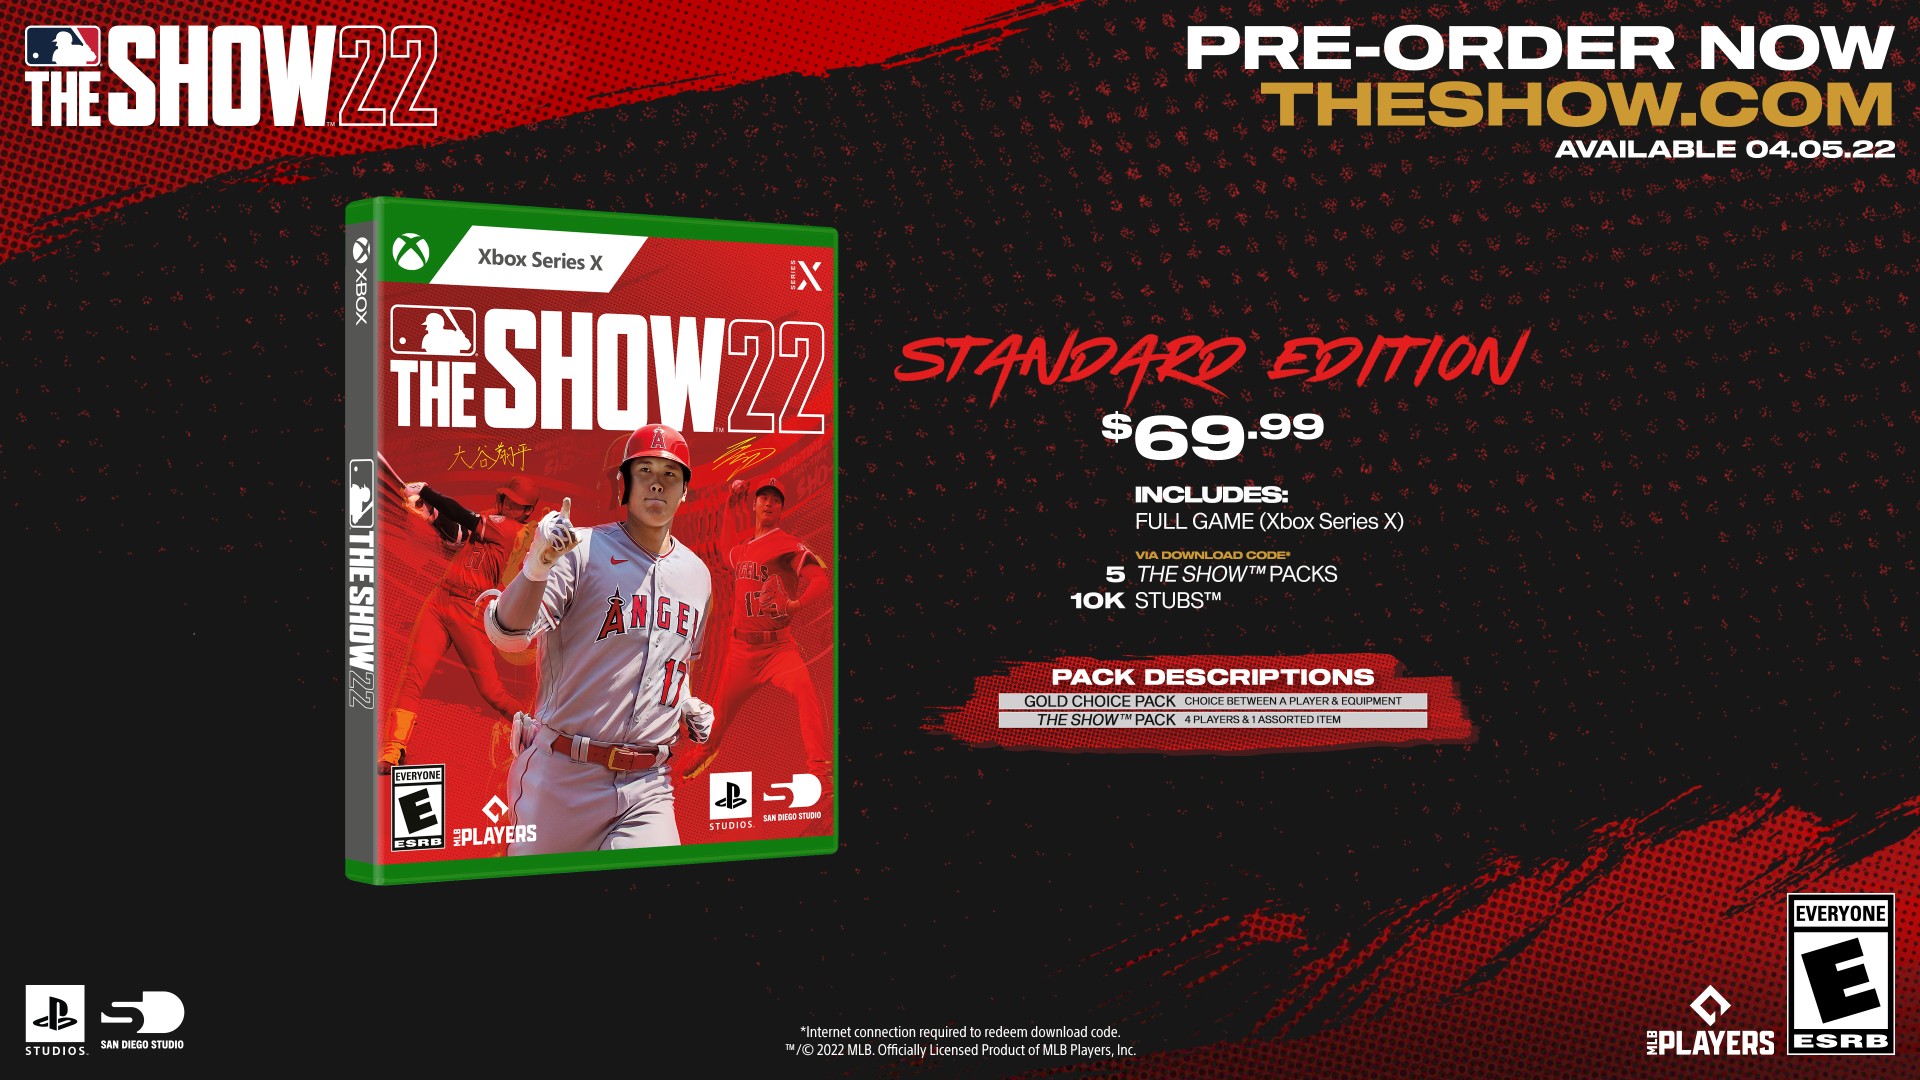 Rand al Thor 19 on X: First it was Outriders Day 1 on #Xbox Game Pass. Now  it is the PlayStation developed MLB The Show 21 Day 1 FREE on Xbox Game